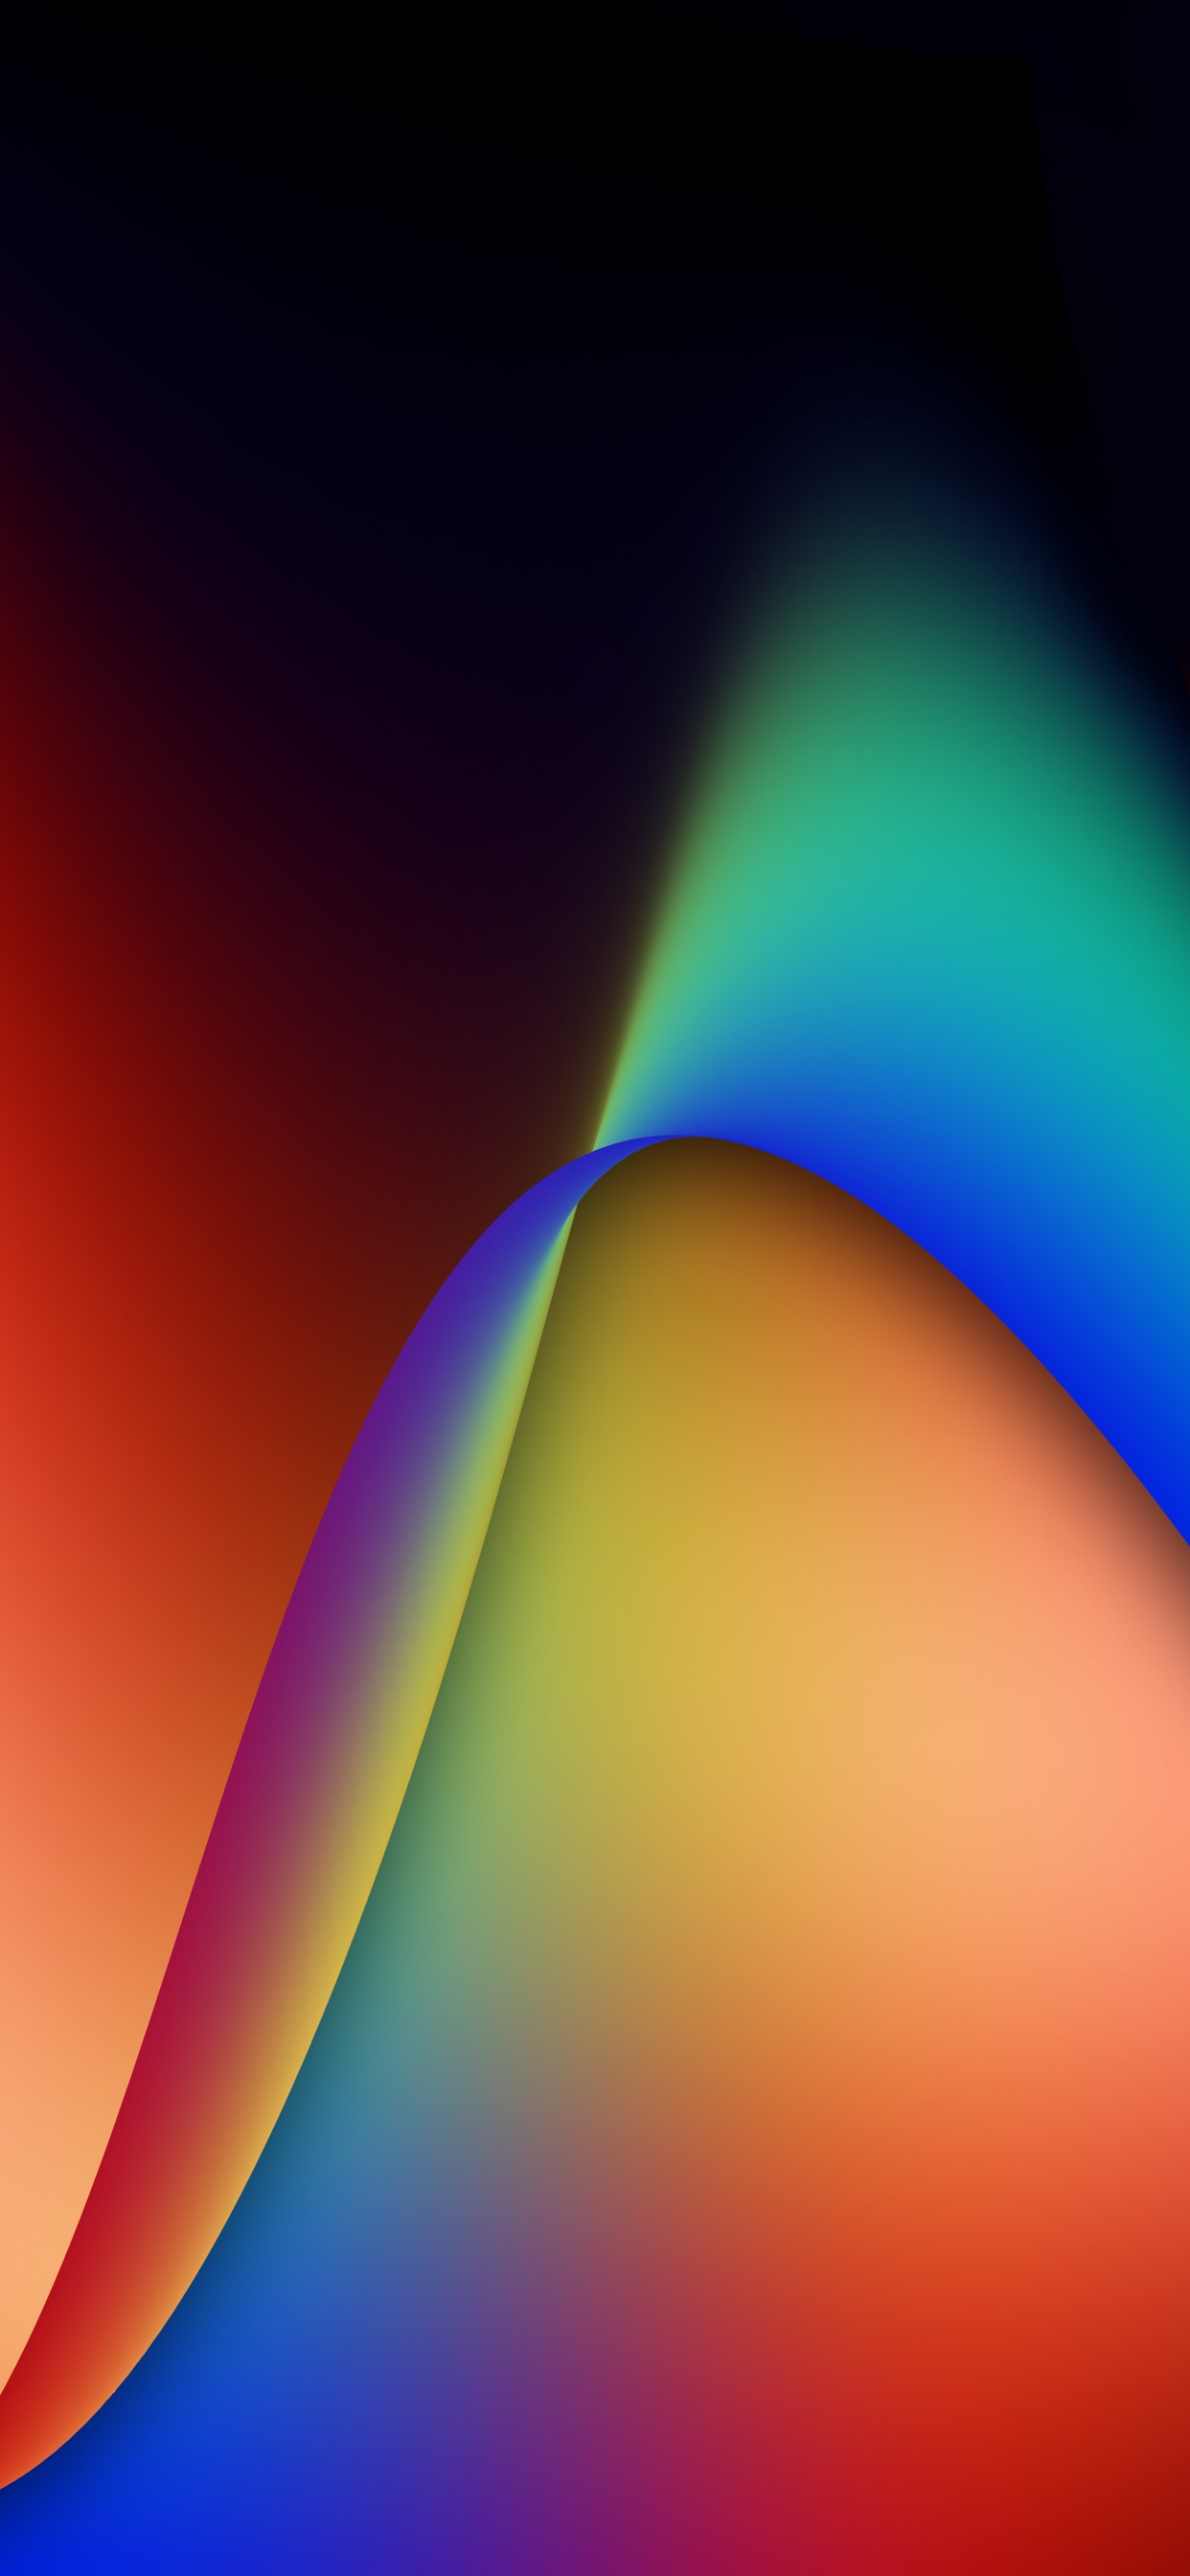 Light, Science, Physics, Colorfulness, Electric Blue. Wallpaper in 1242x2688 Resolution